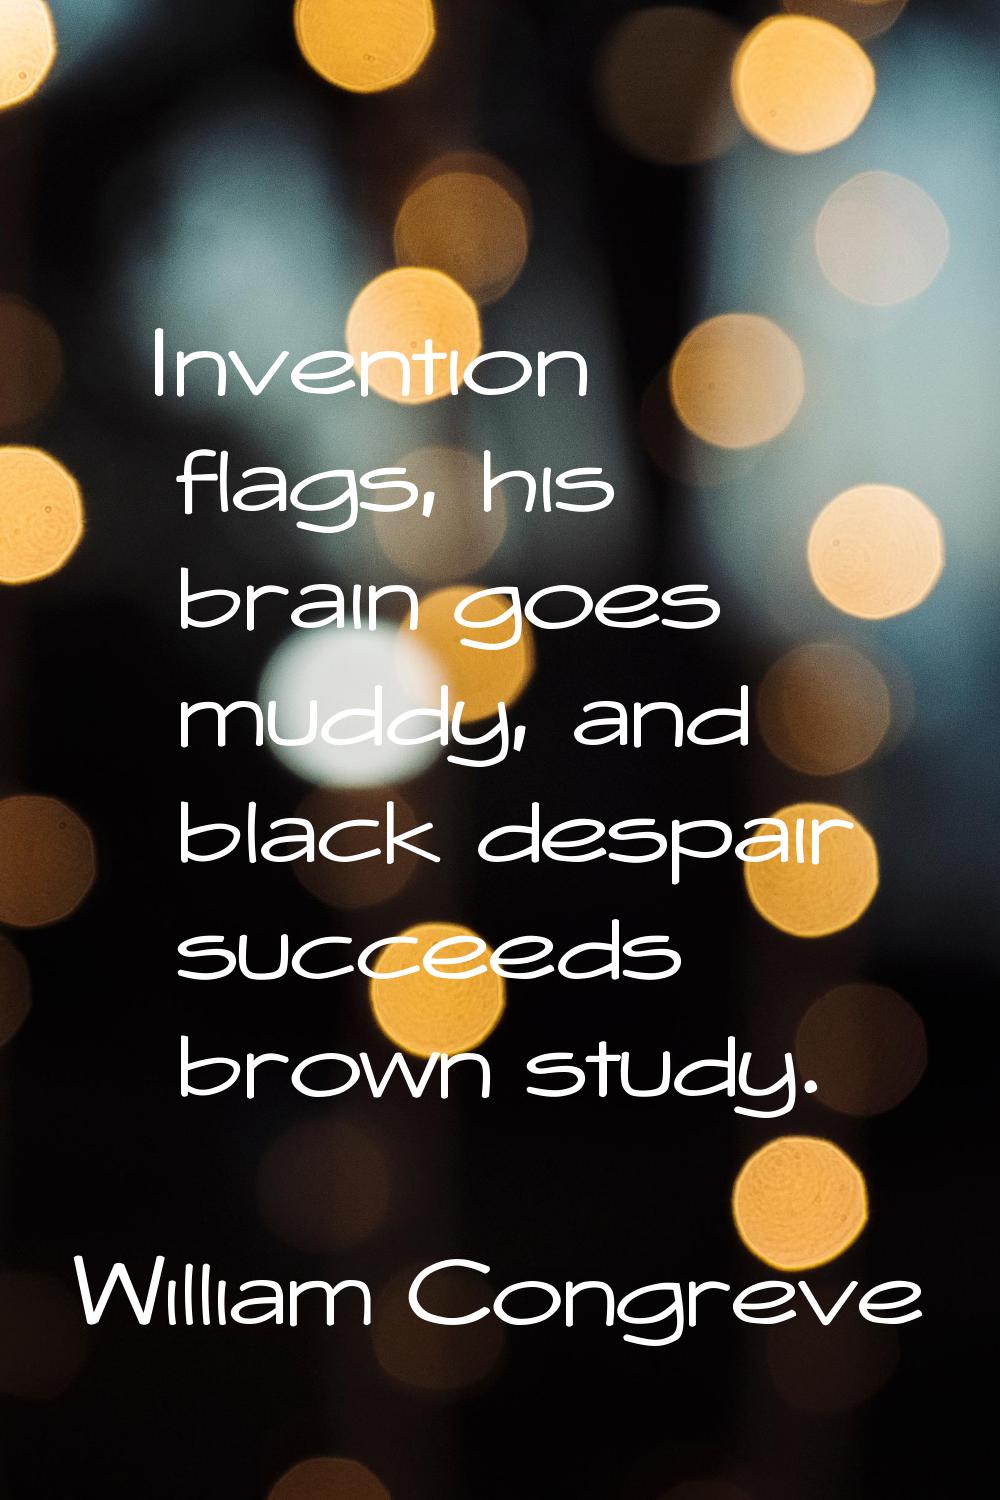 Invention flags, his brain goes muddy, and black despair succeeds brown study.